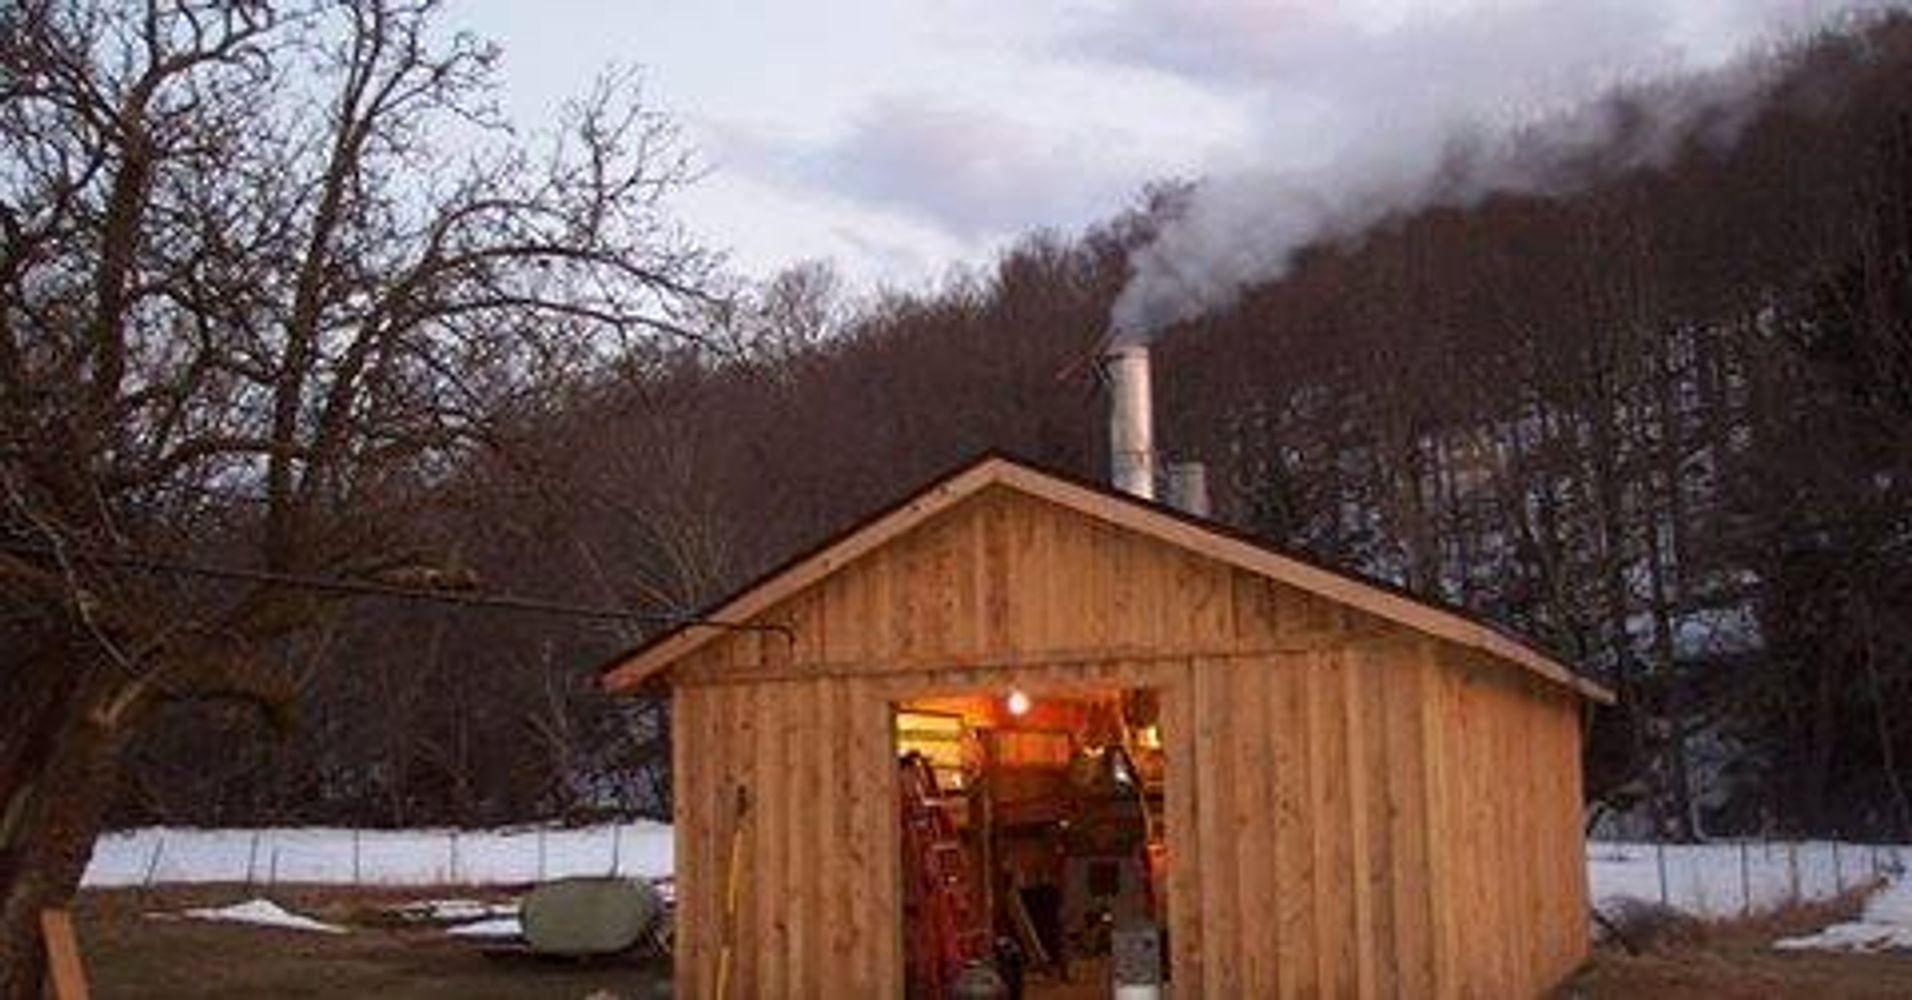 Millbrook Maple Sap house making maple syrup in the catskill mountains of New York State